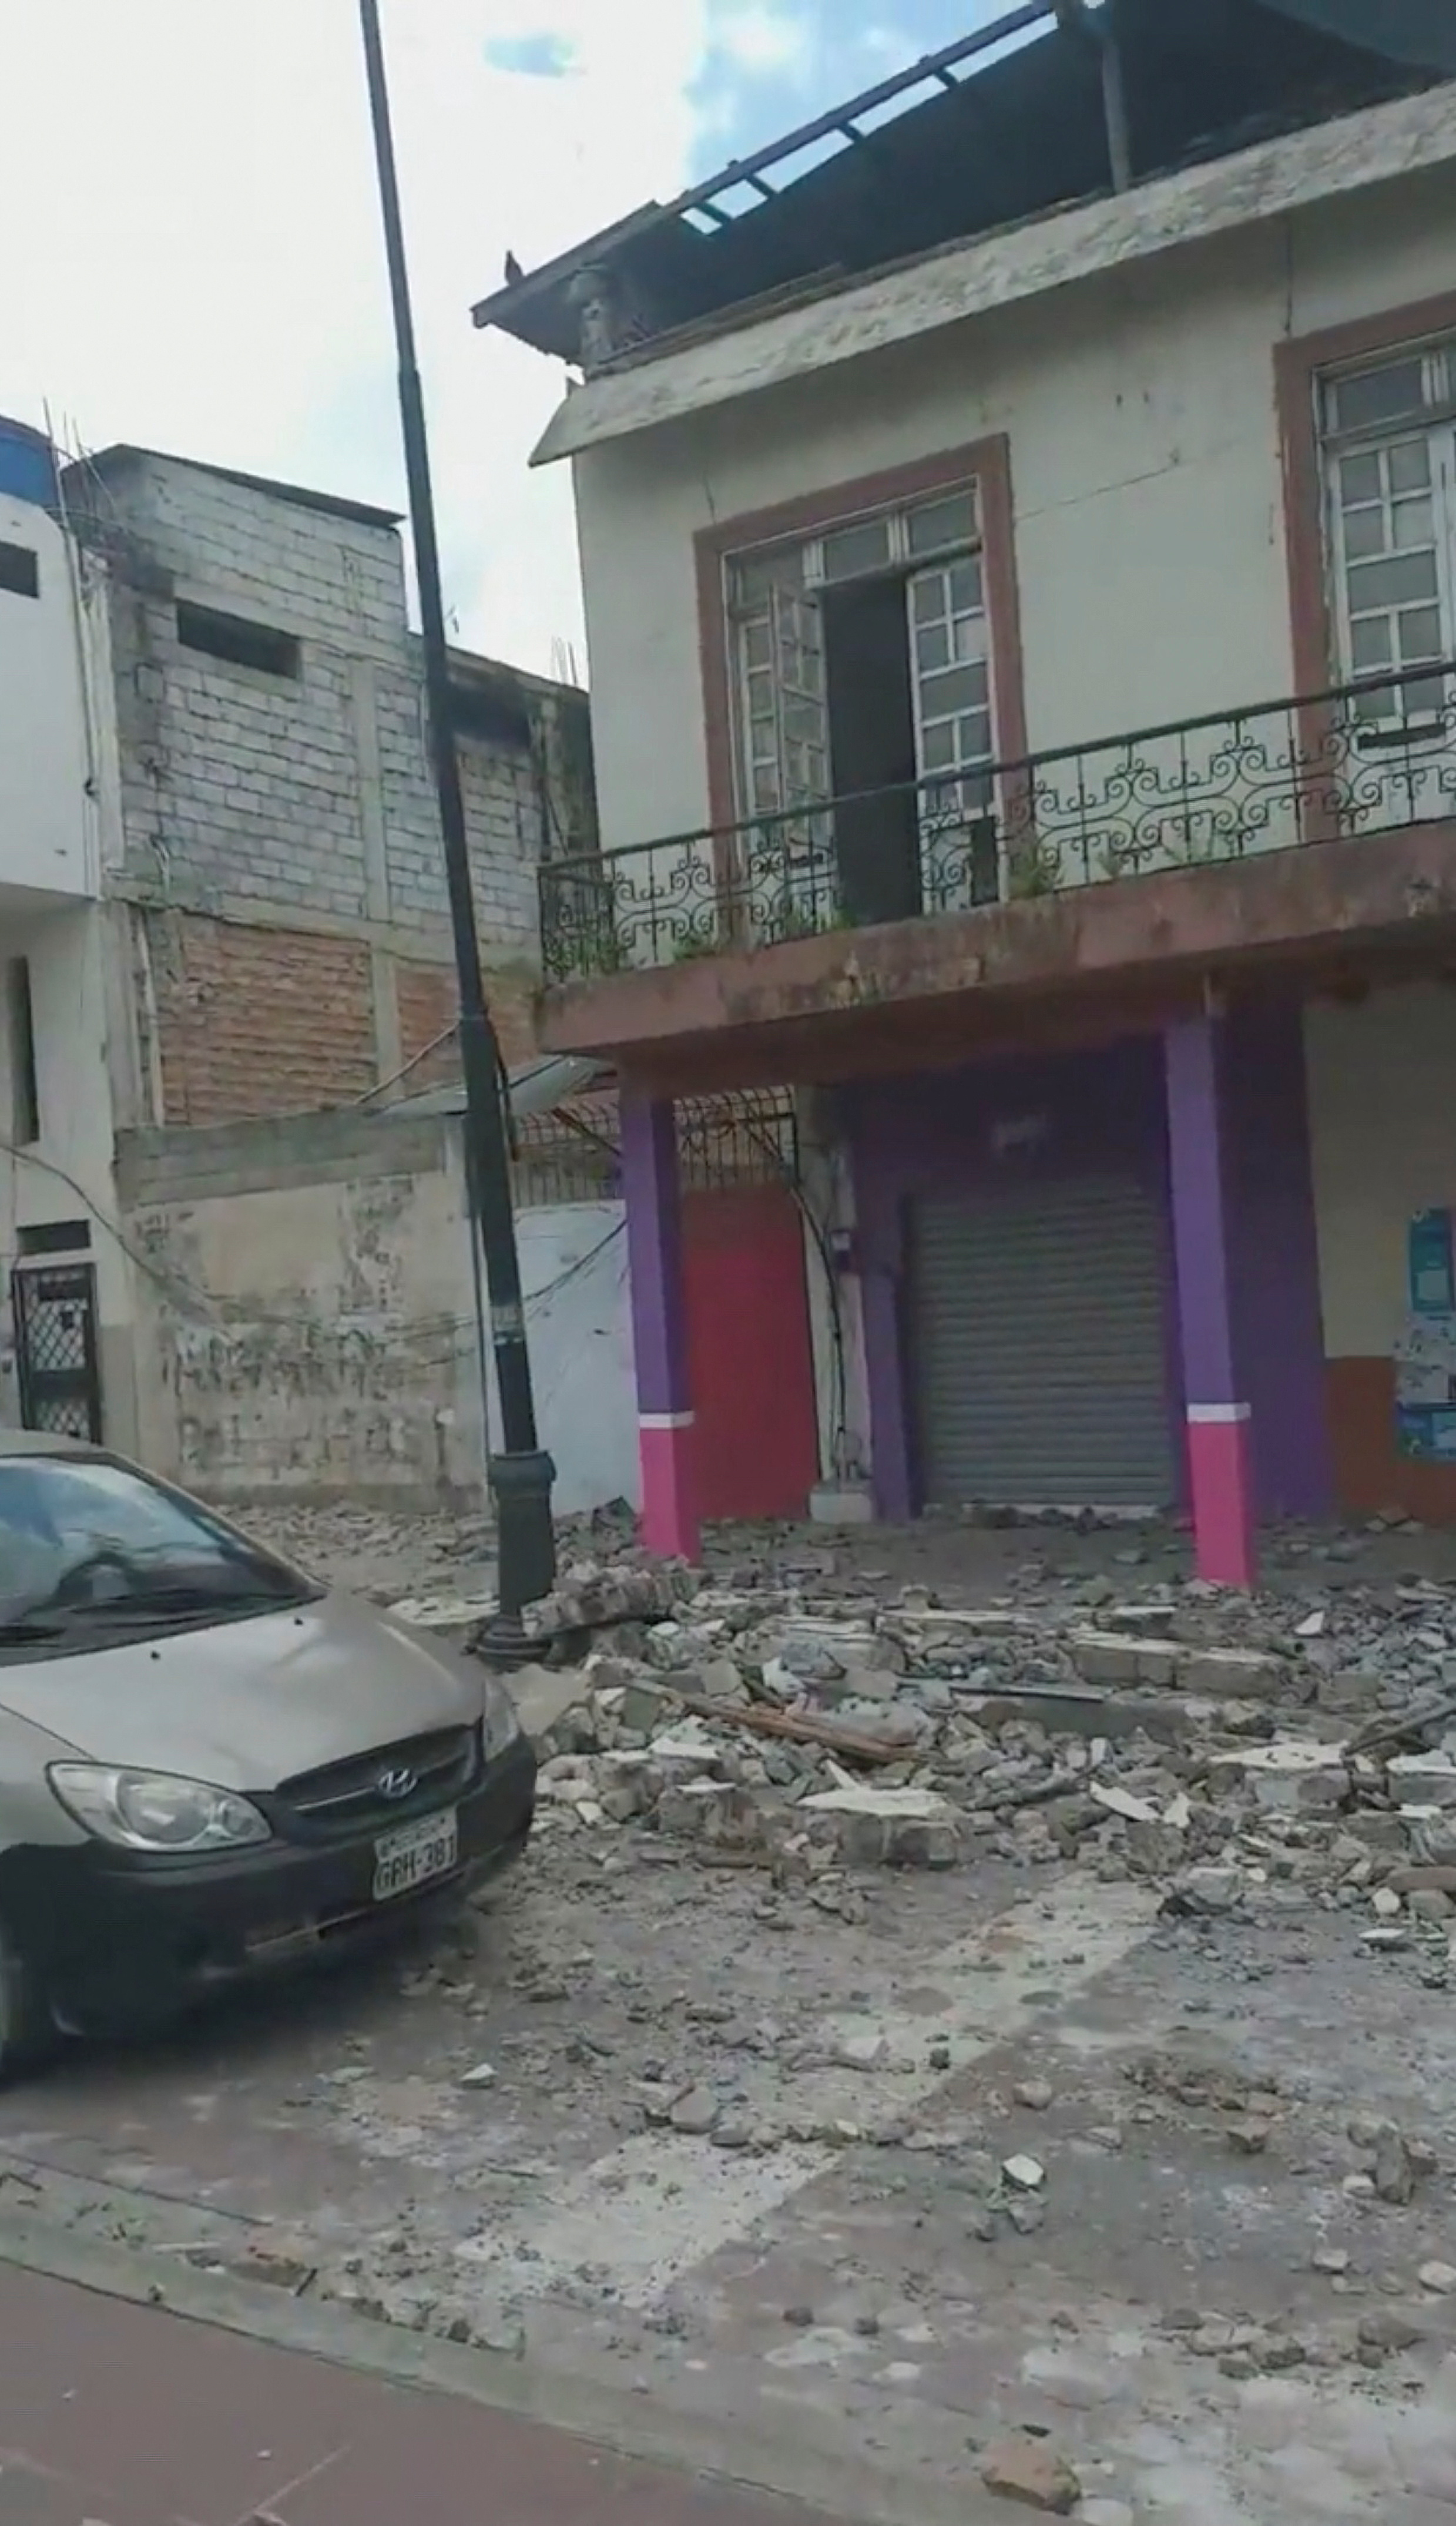 Photos, videos and victims: The images and ravages of the earthquake in Ecuador